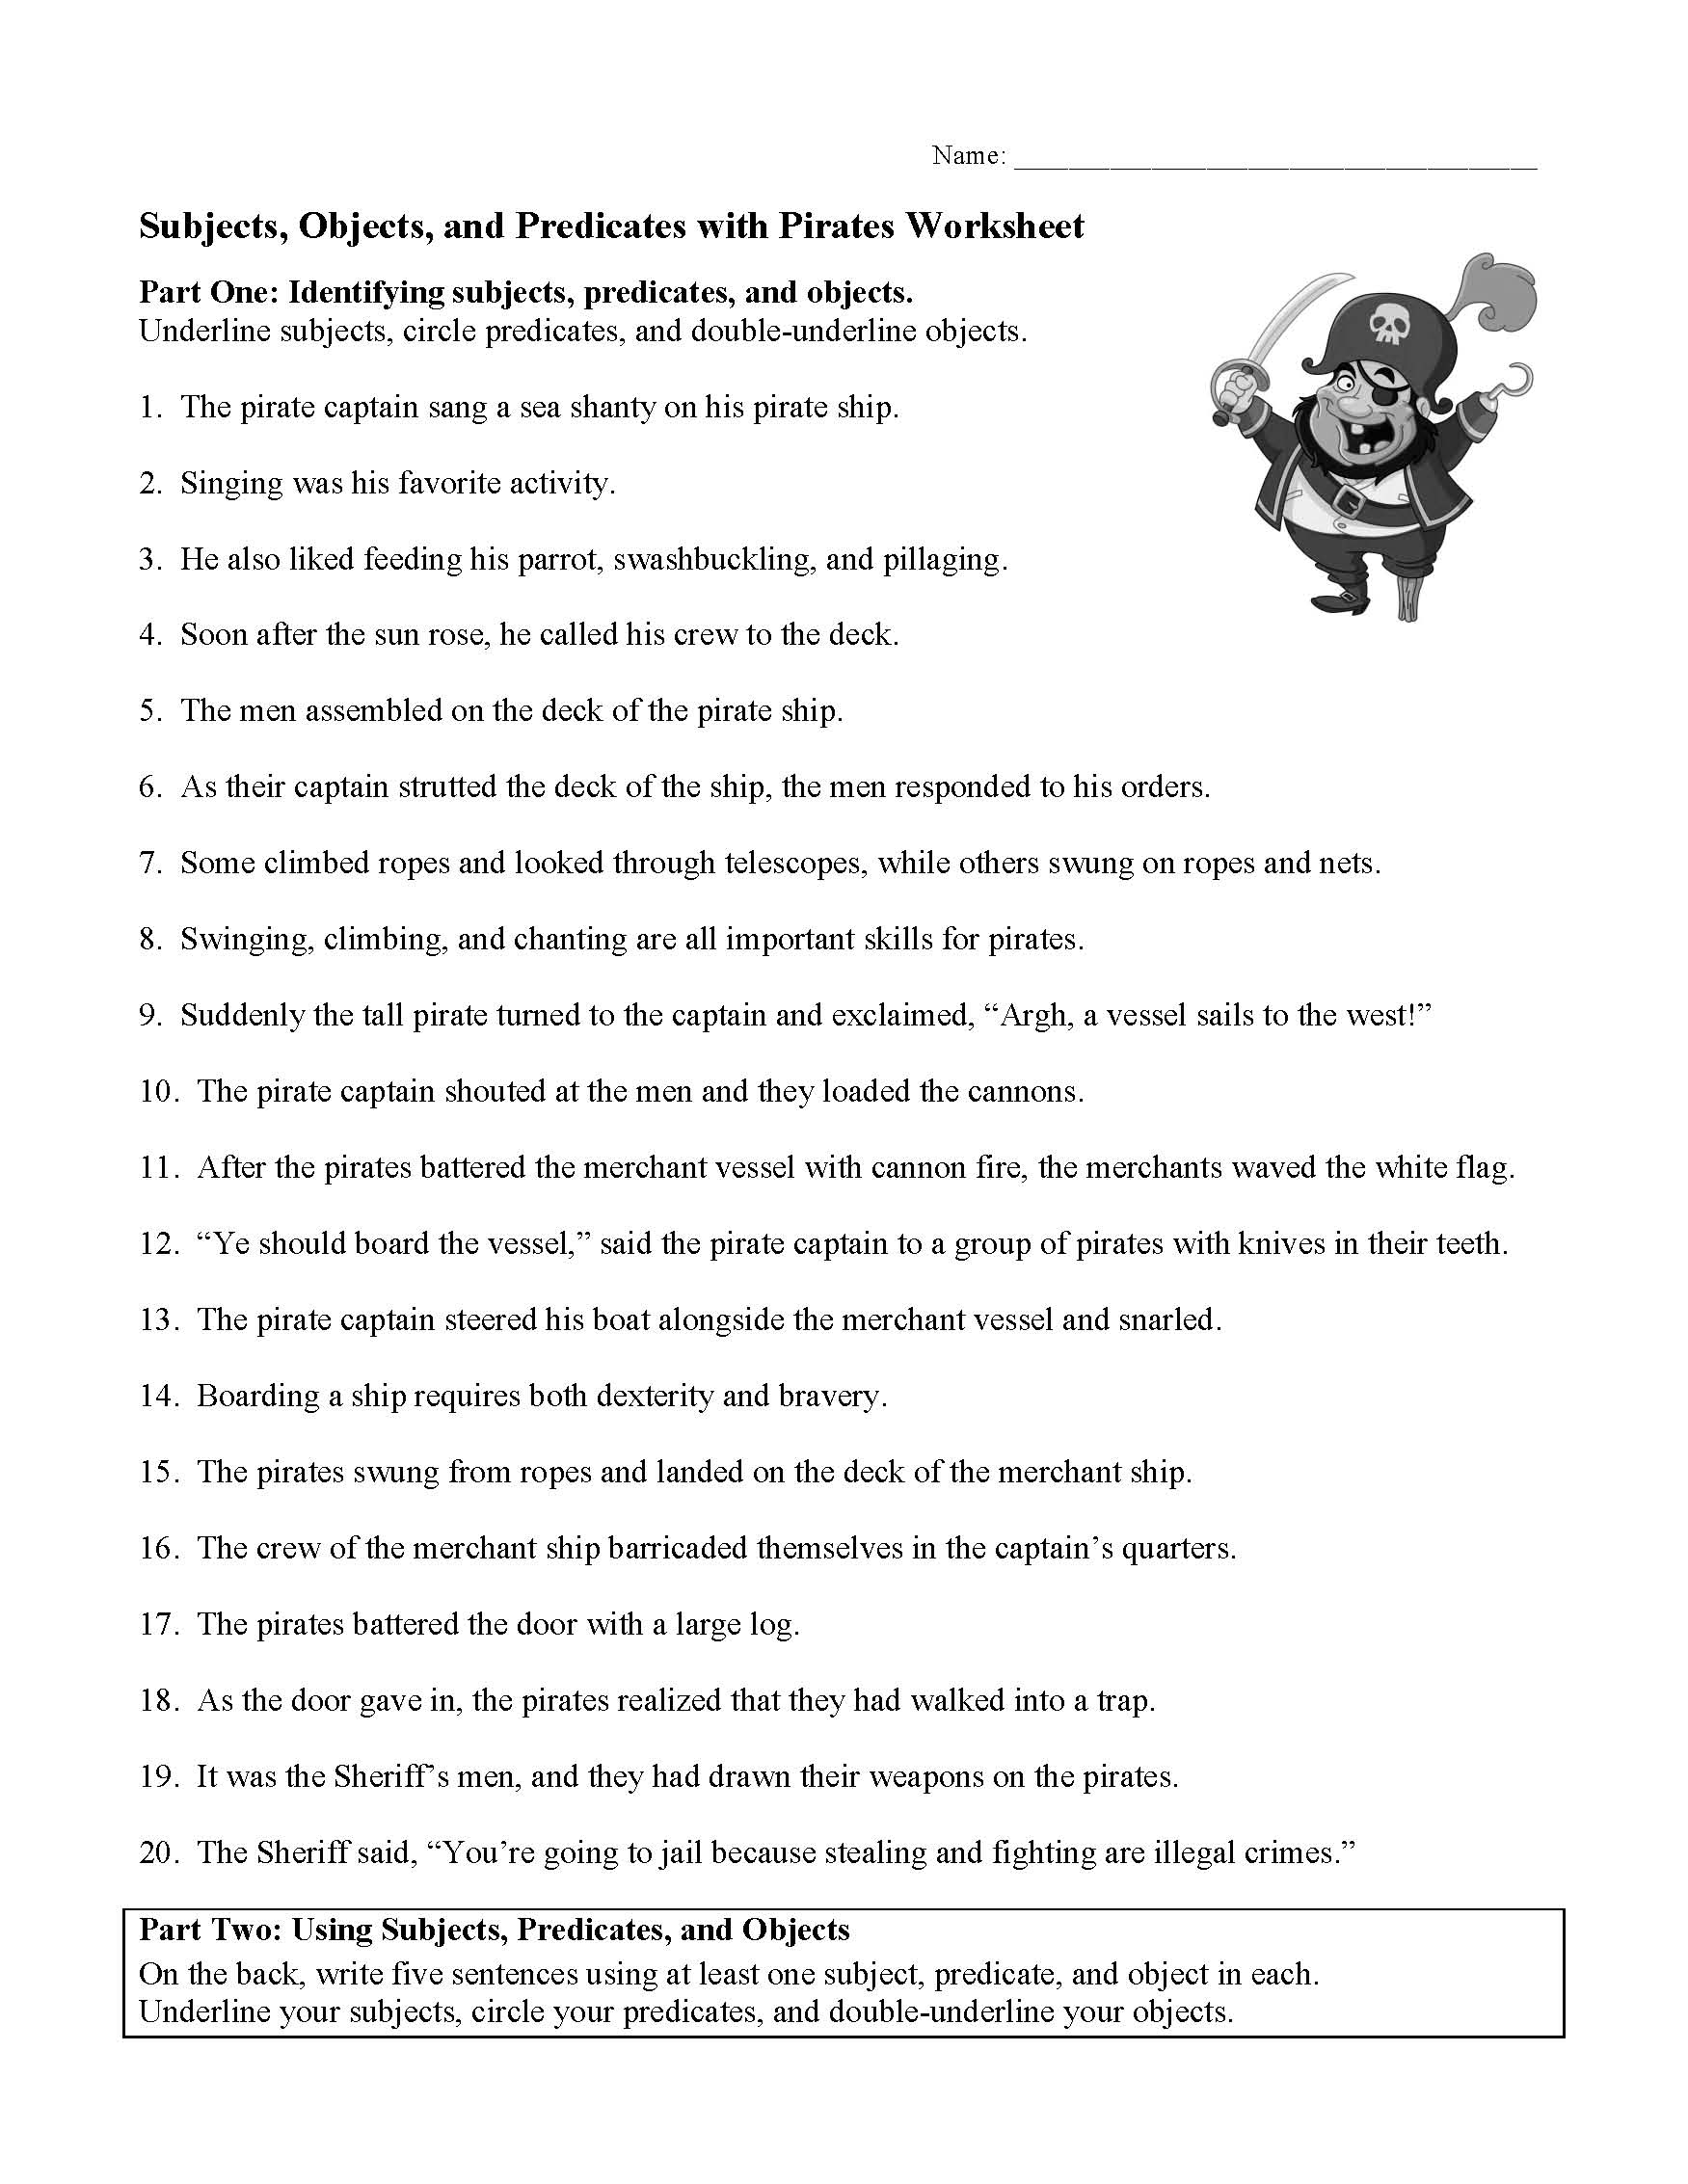 subjects-objects-and-predicates-with-pirates-worksheet-sentence